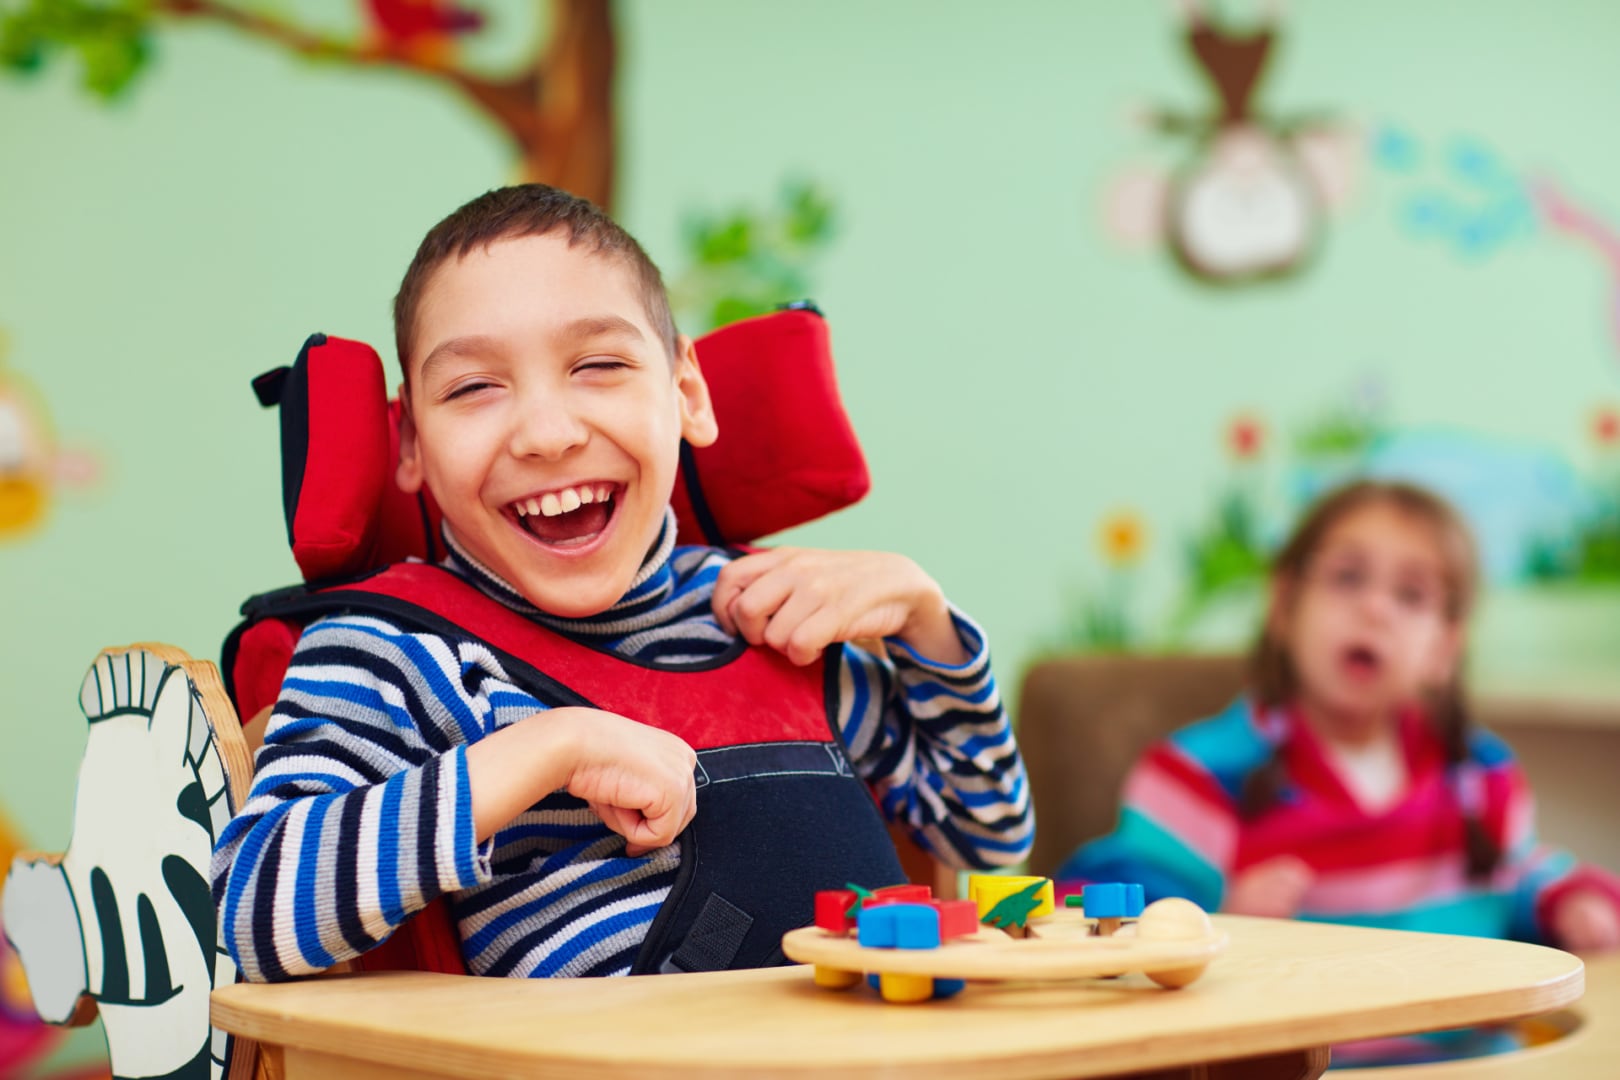 Special needs child care: Tips and advice for parents